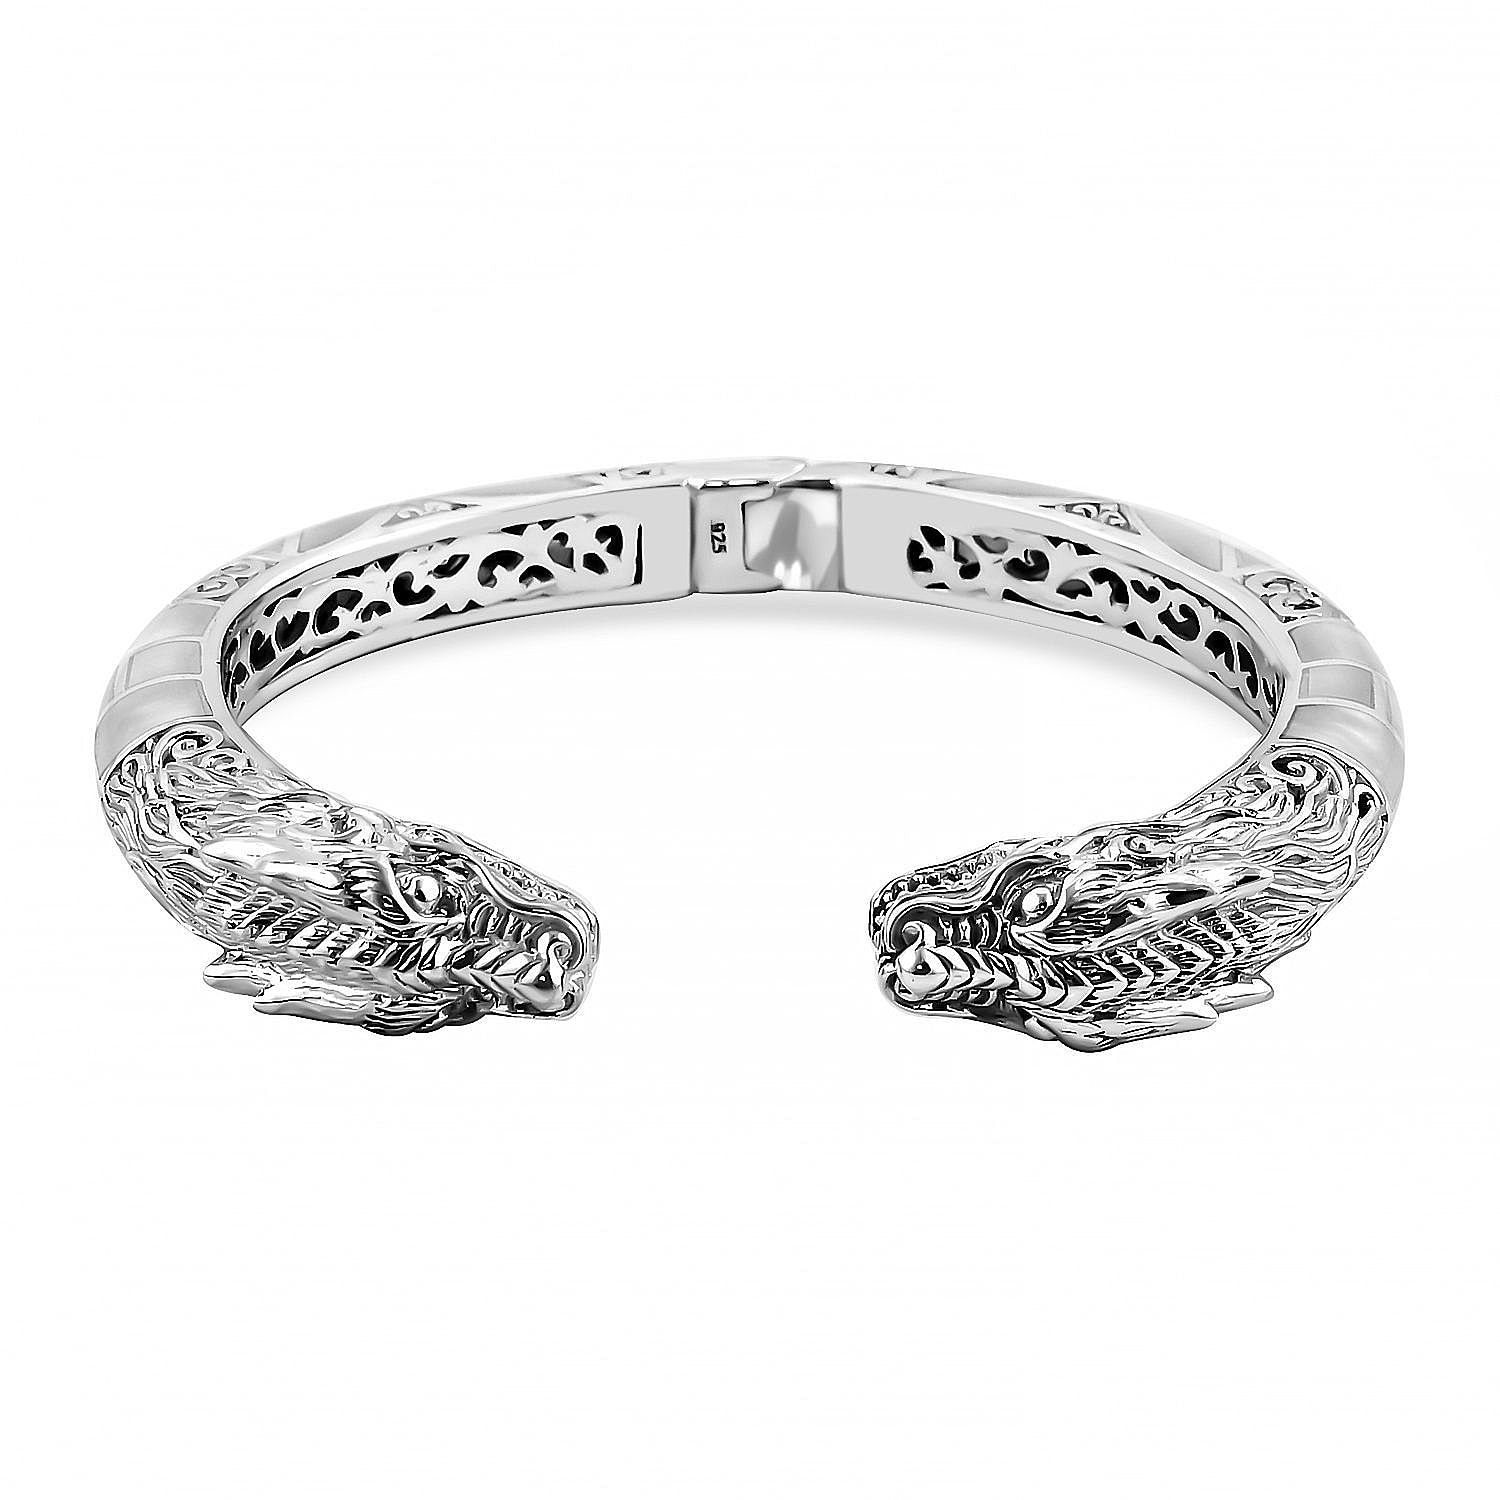 Royal Bali Collection - Artisan Crafted Mother Of Pearl Dragon Cuff Bangle (Size 7.5) in Sterling Silver